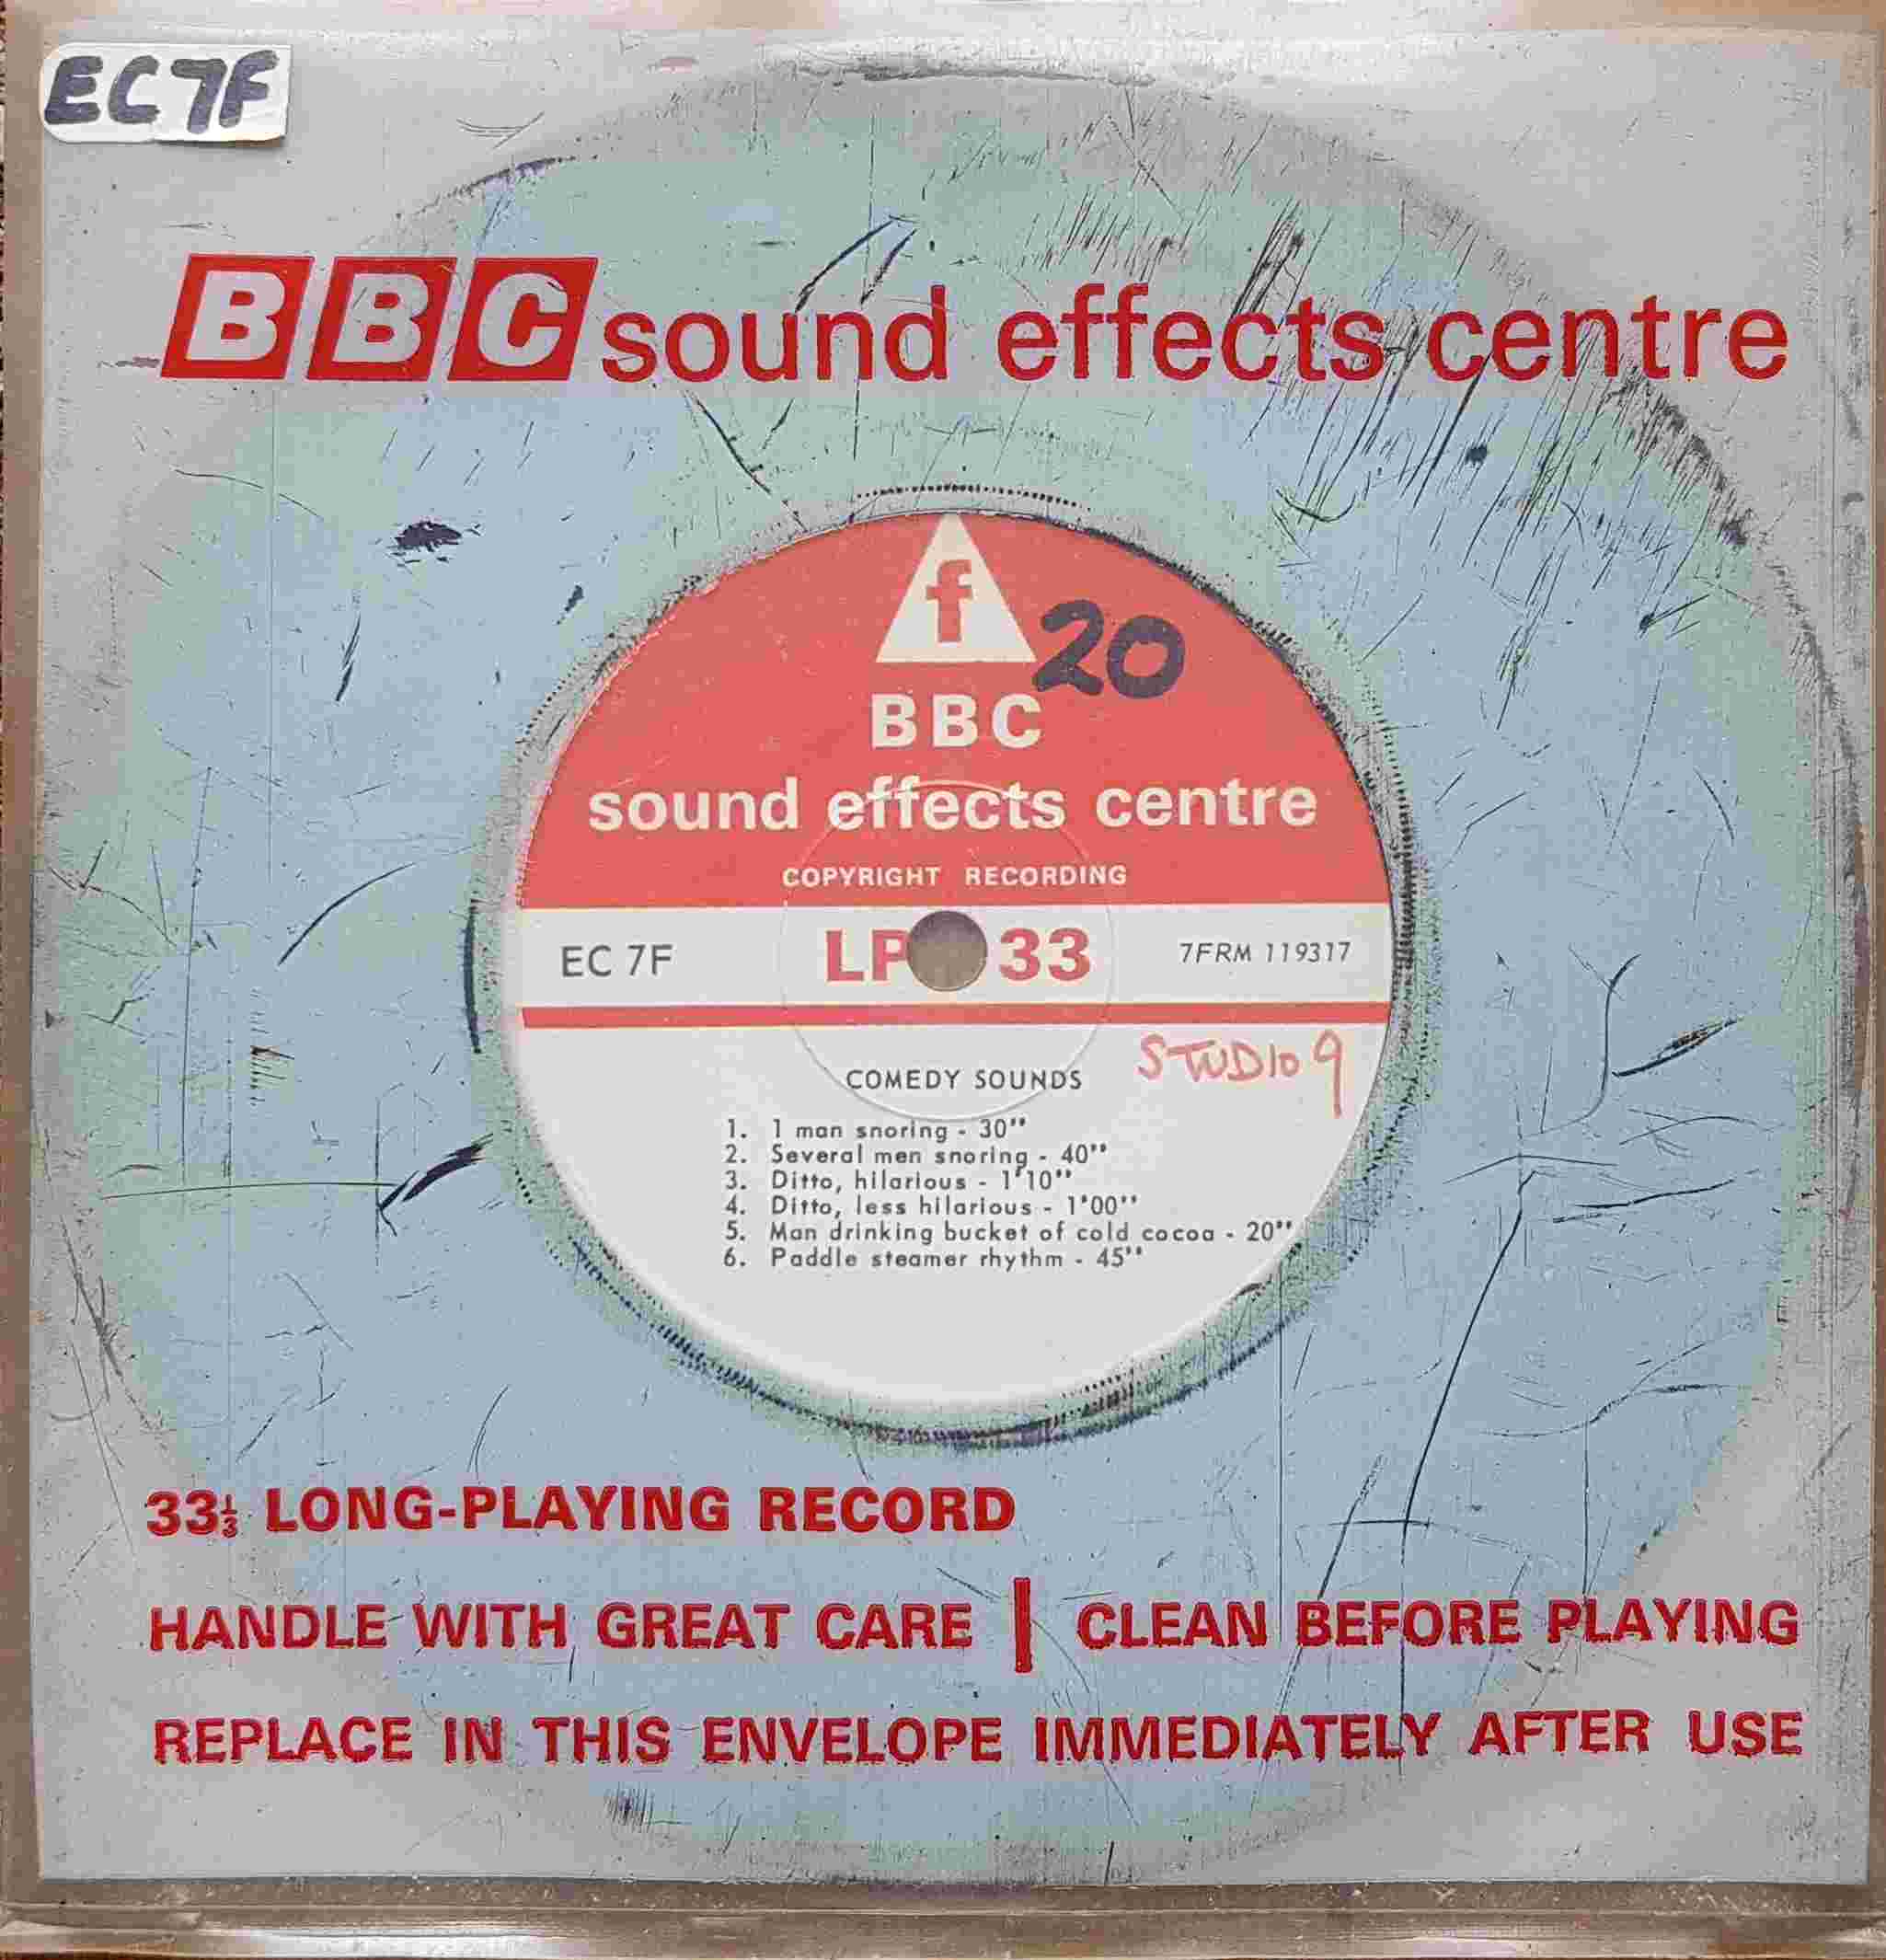 Picture of EC 7F Comedy sounds by artist Not registered from the BBC singles - Records and Tapes library